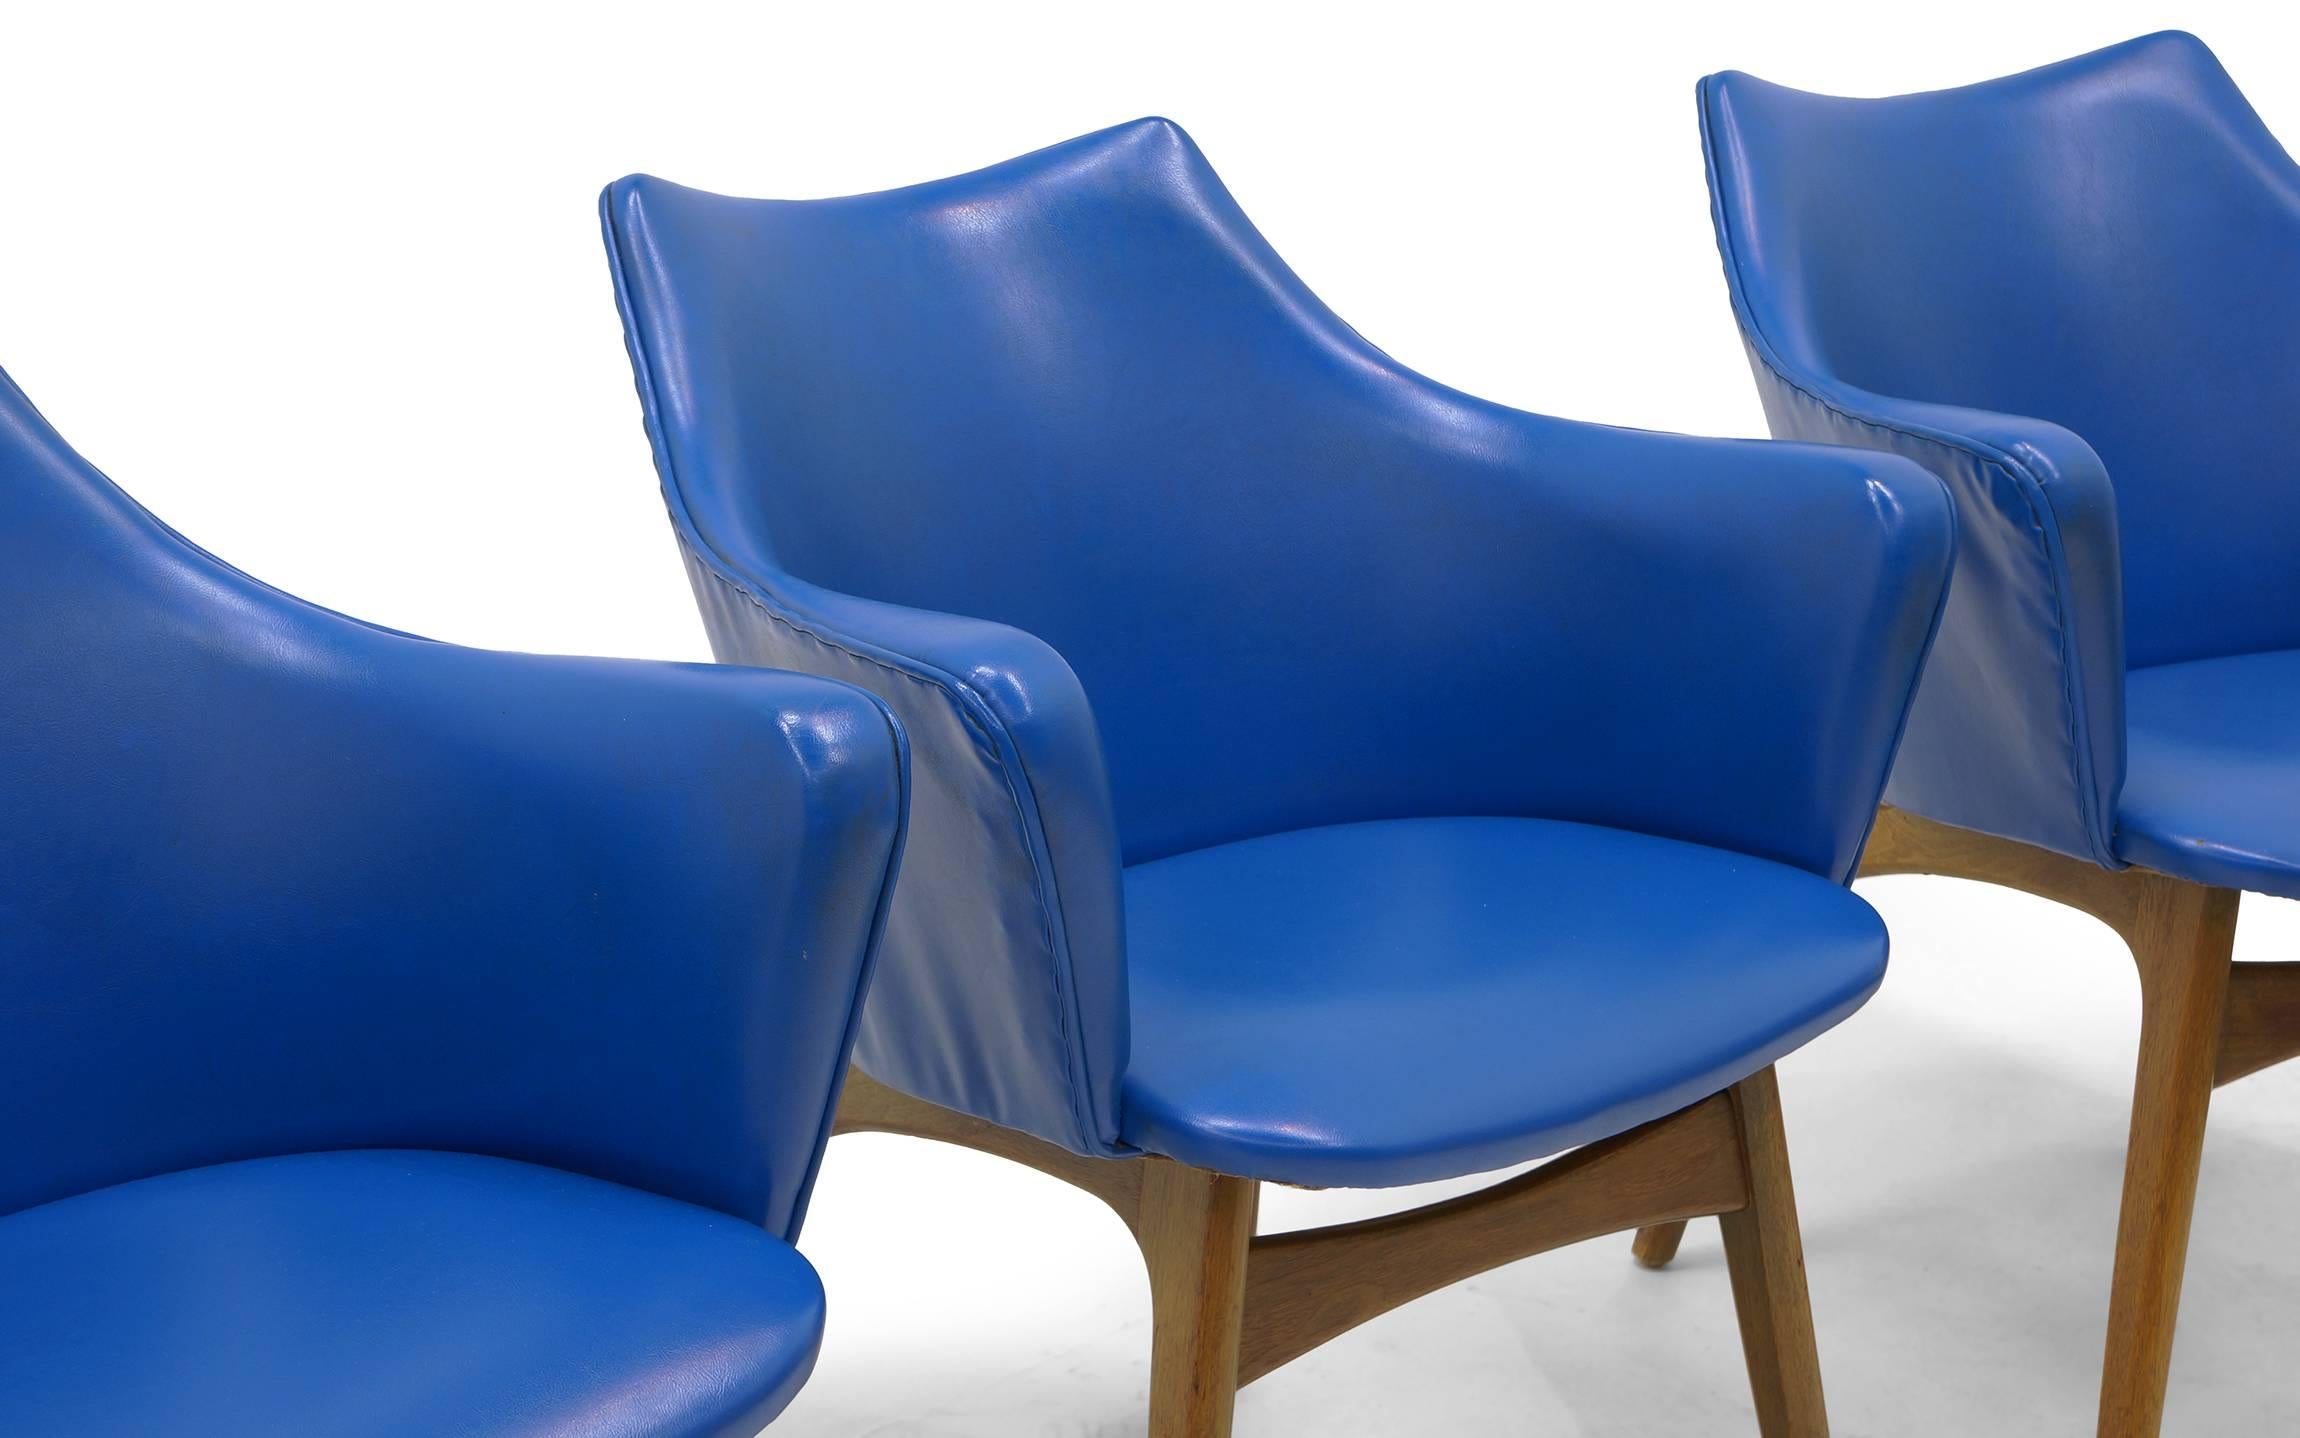 Set of four dining chairs designed by Adrian Pearsall for Craft Associates. Walnut legs and blue vinyl upholstery. The vinyl is in very good condition but is loose in areas around the sides and backs of the chairs. They are ready to use as is, but